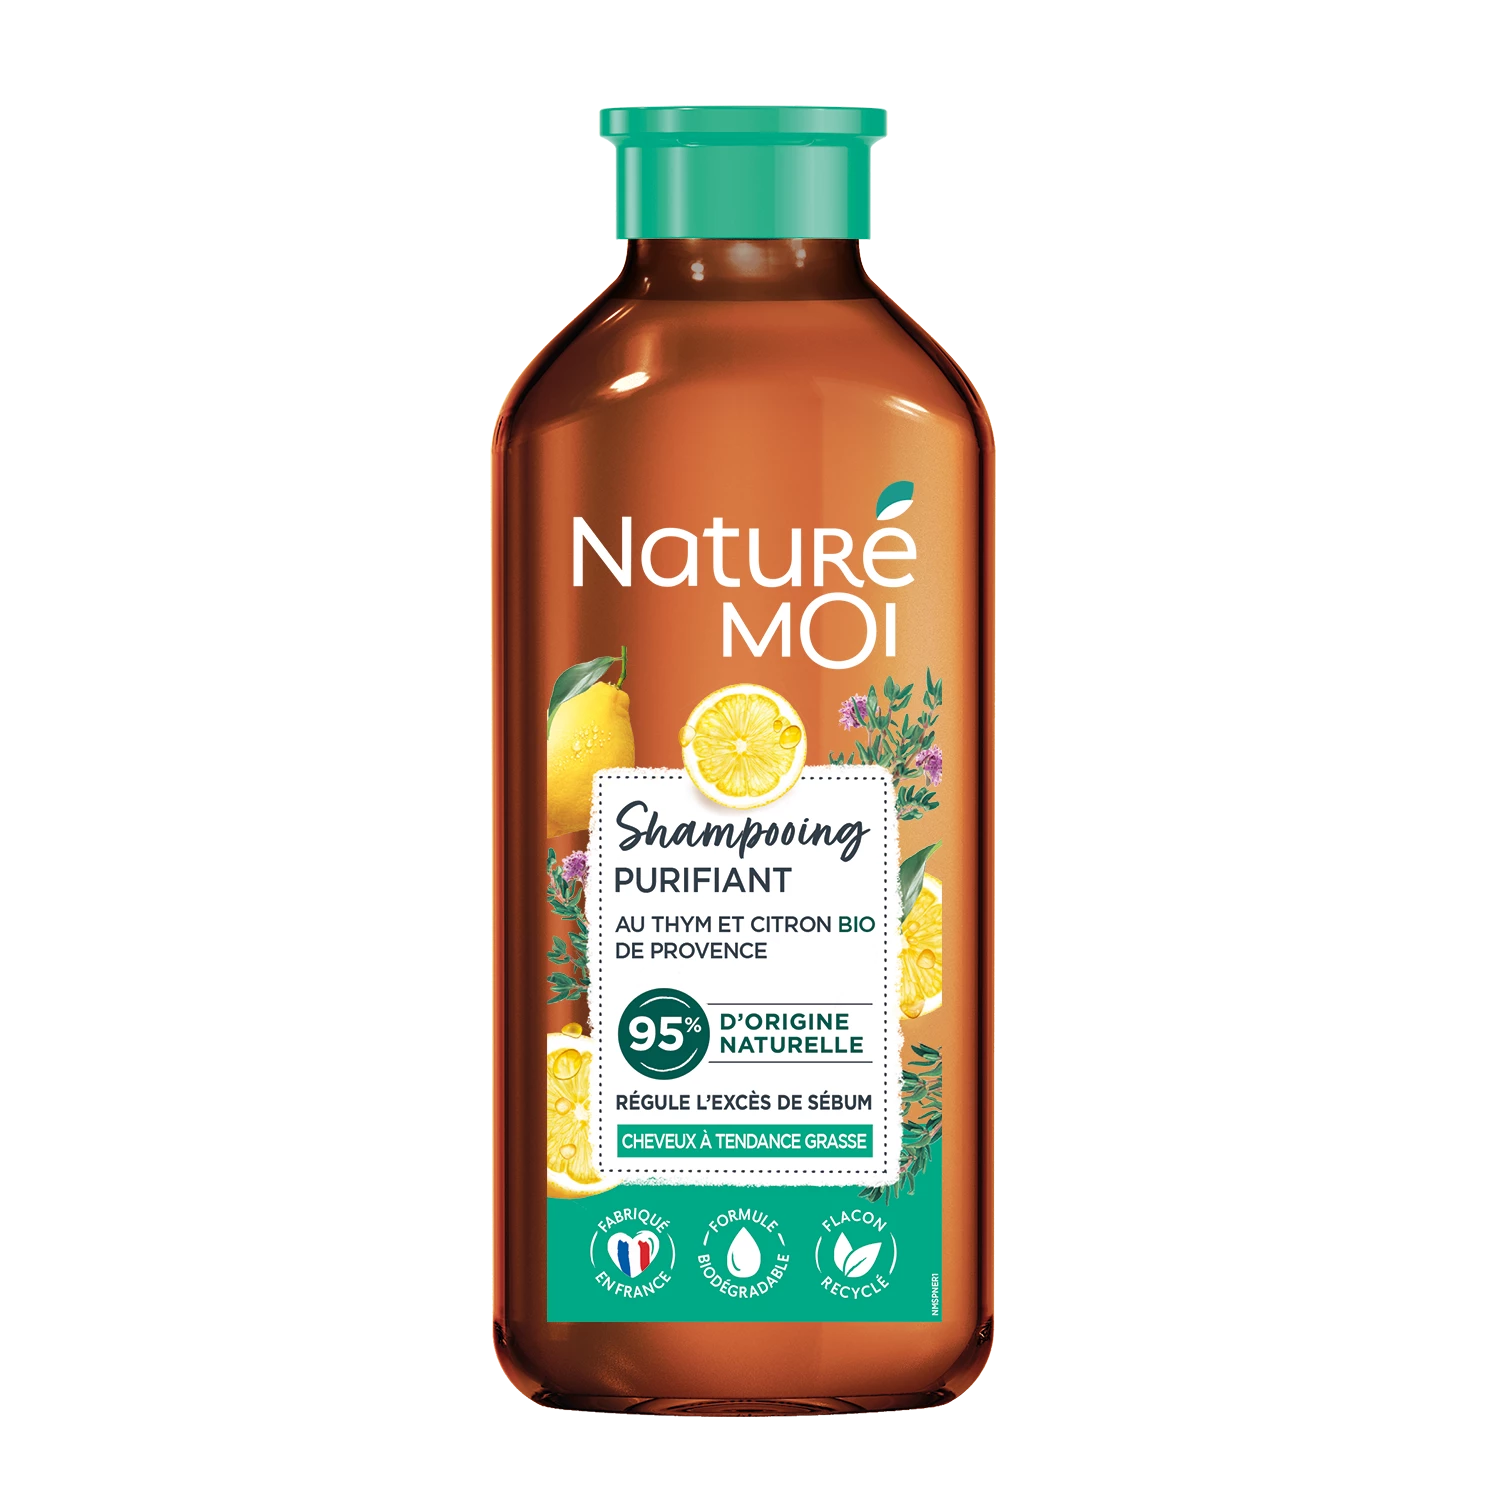 Nature Moi Shp Purif 250ml